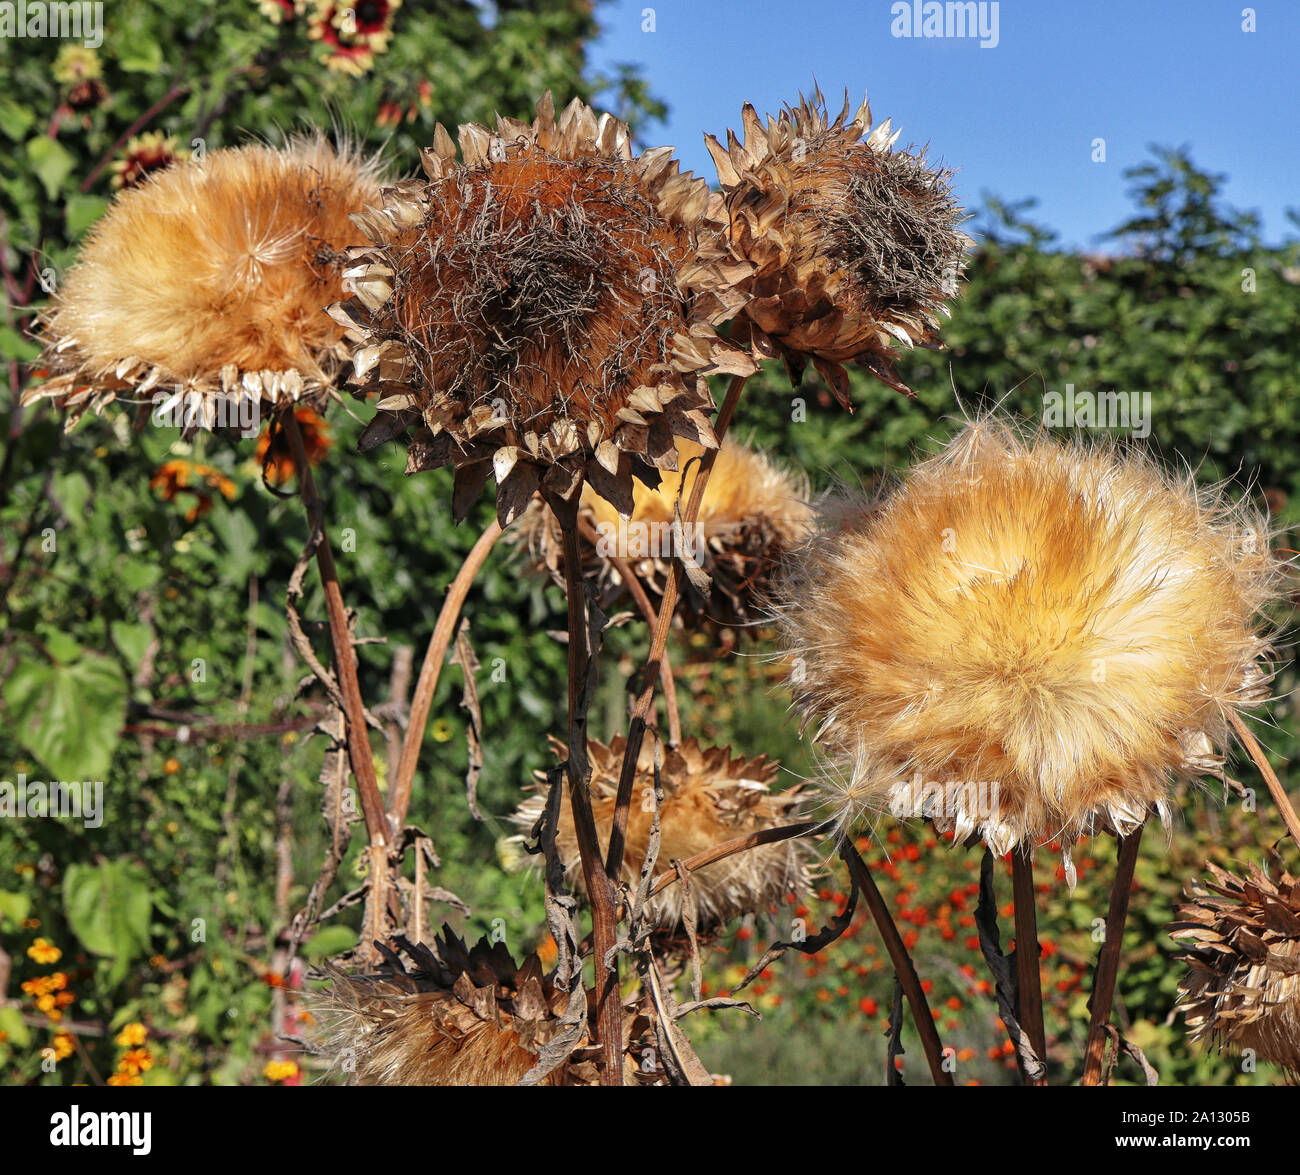 Dried Artichoke Flower High Resolution Stock Photography And Images - Alamy